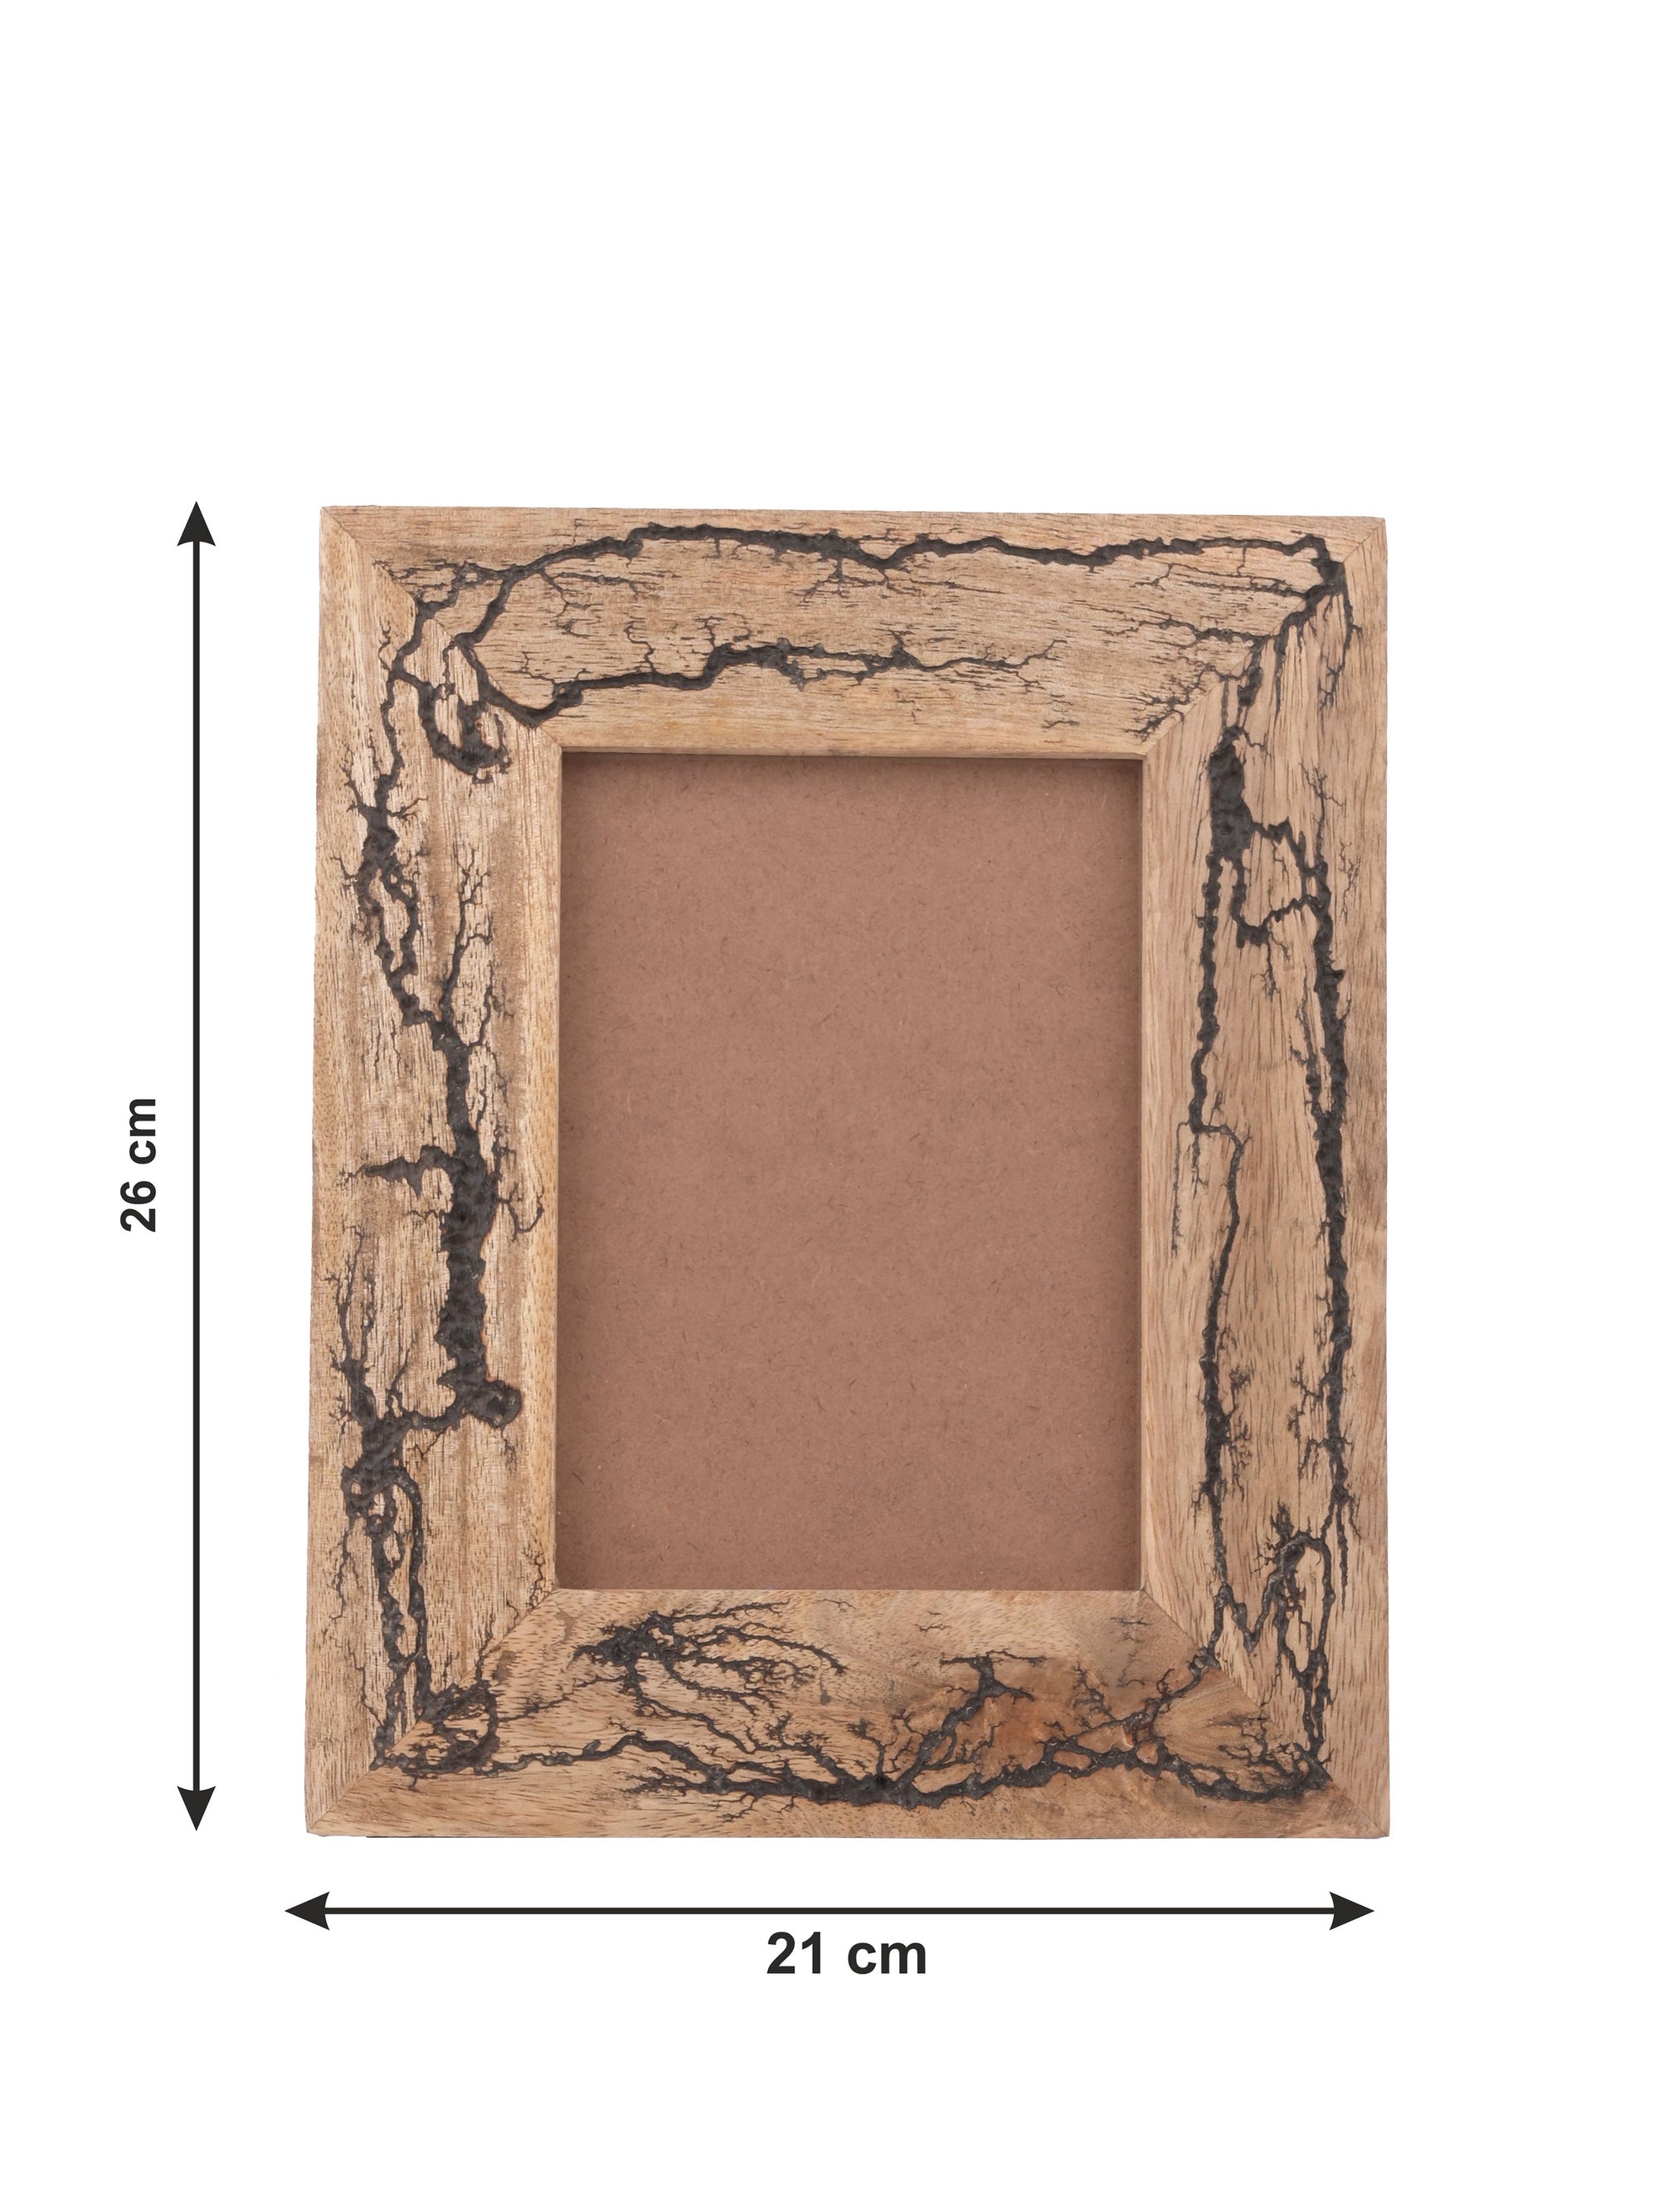 Natural Mango Wood, Rustic Look, Square shaped, Photo Frame - The Heritage Artifacts